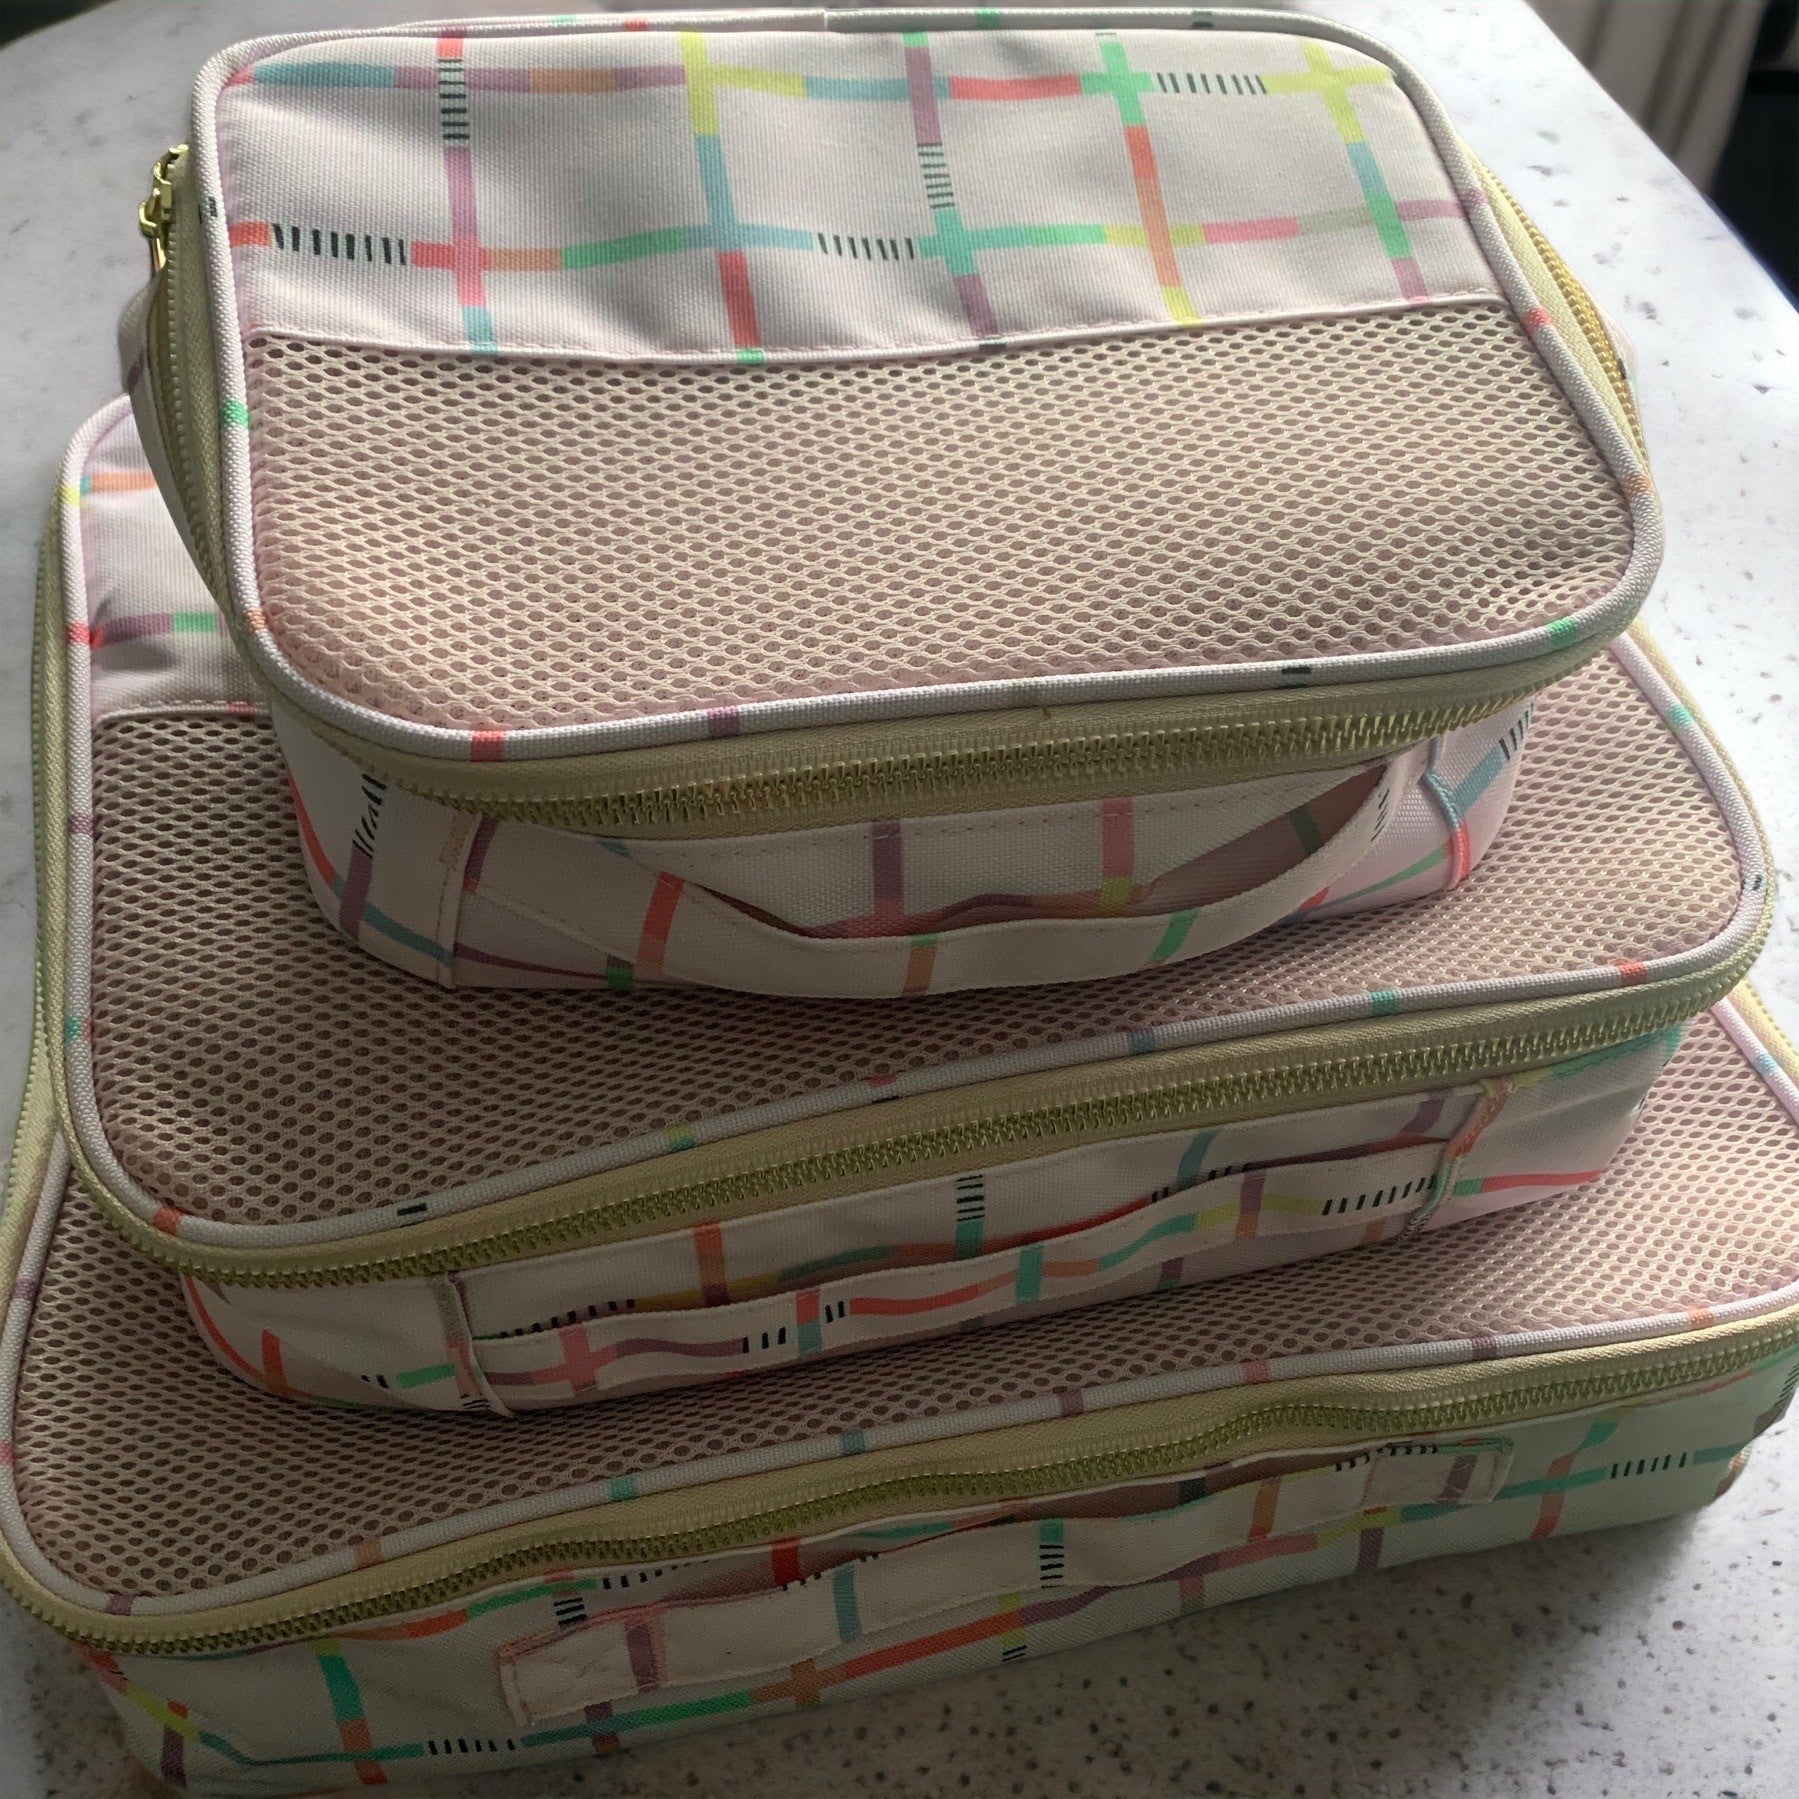 Packing Cubes - Two colourways